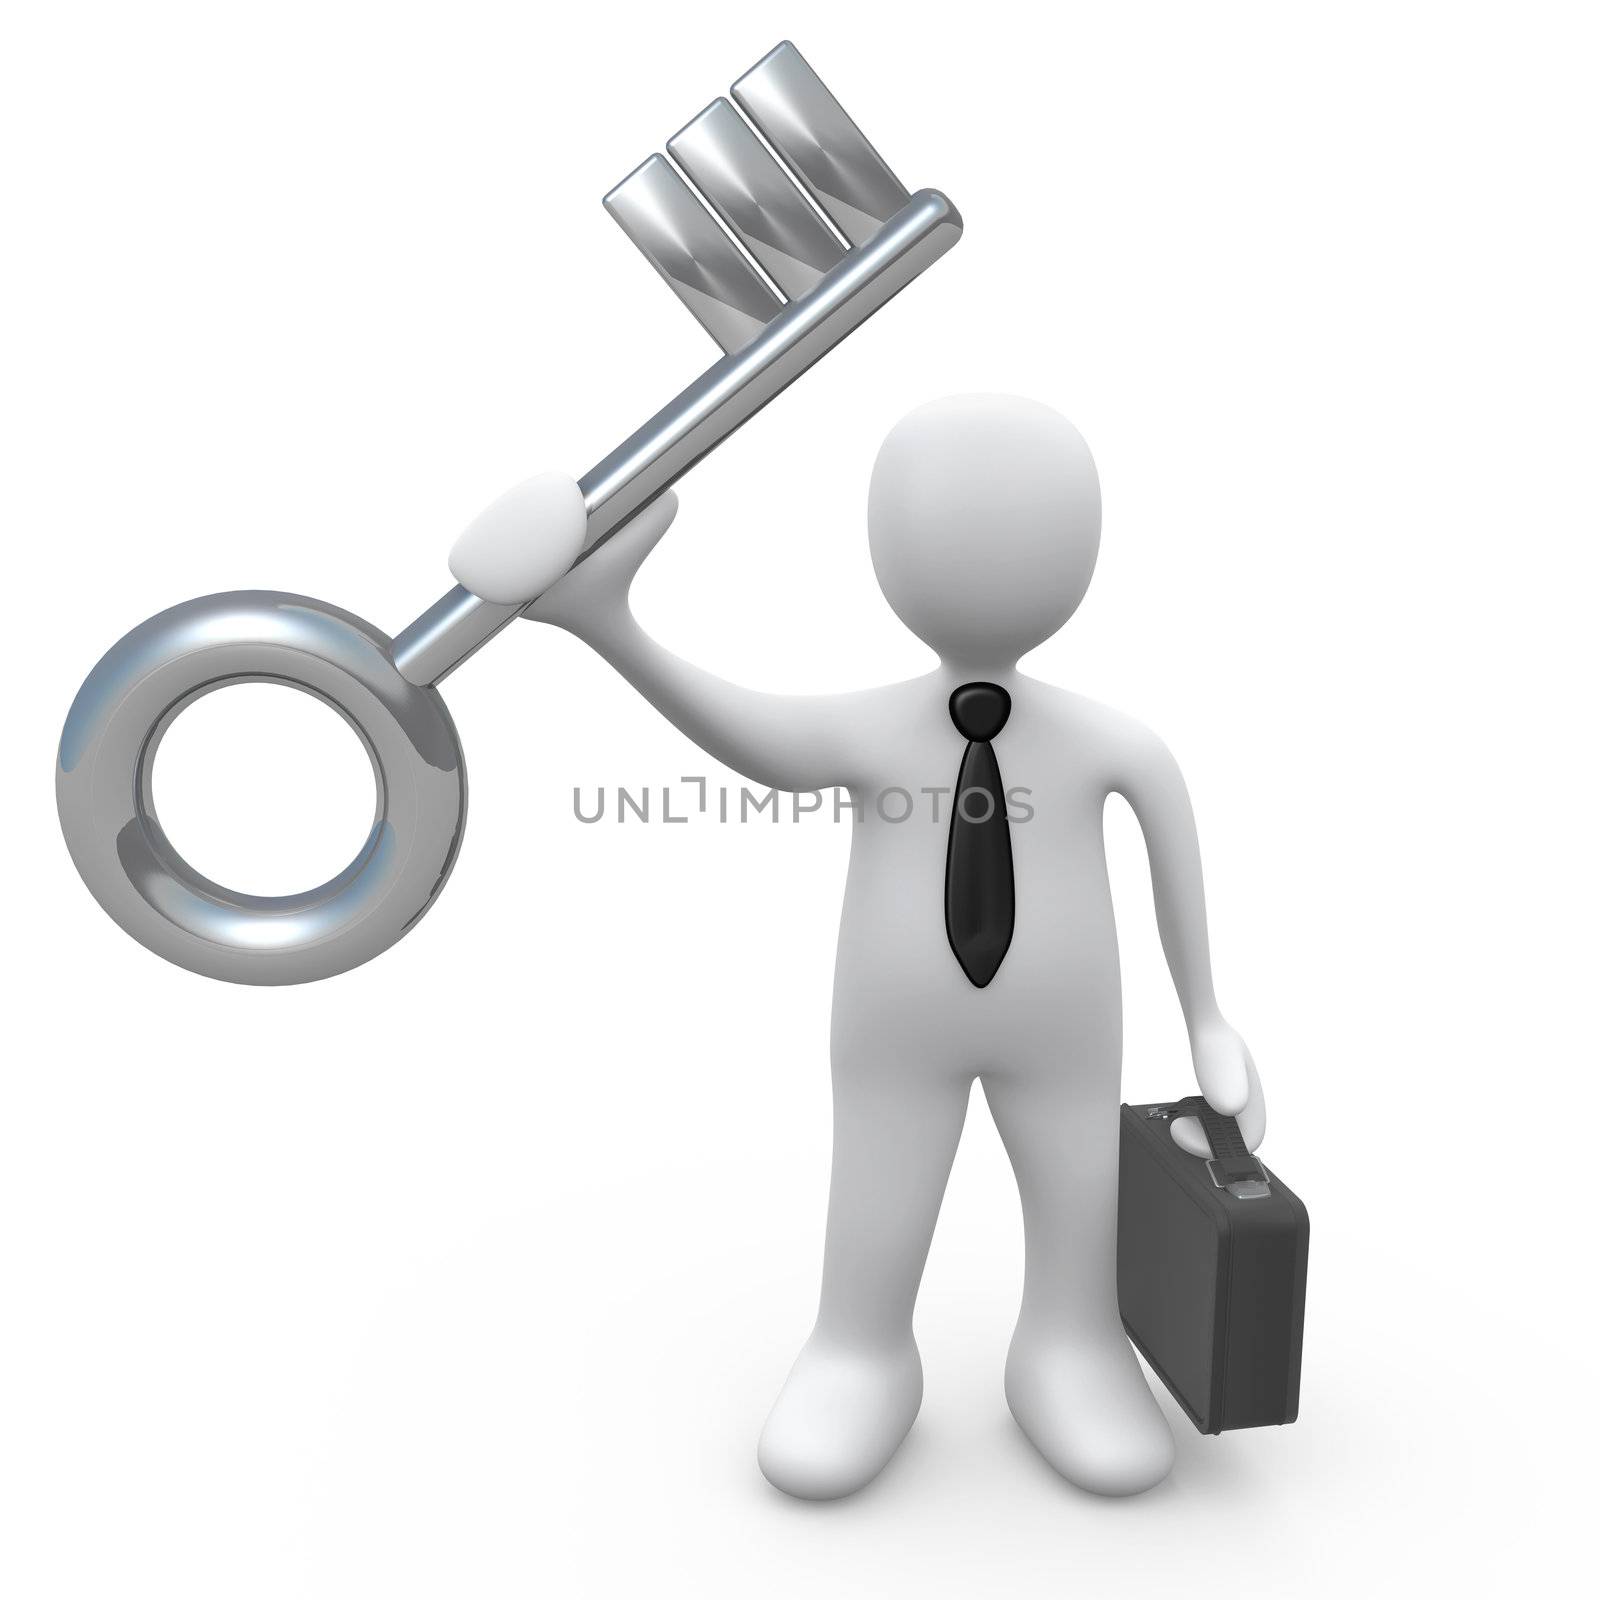 Business person holding a large key. Metaphor for solution or success.